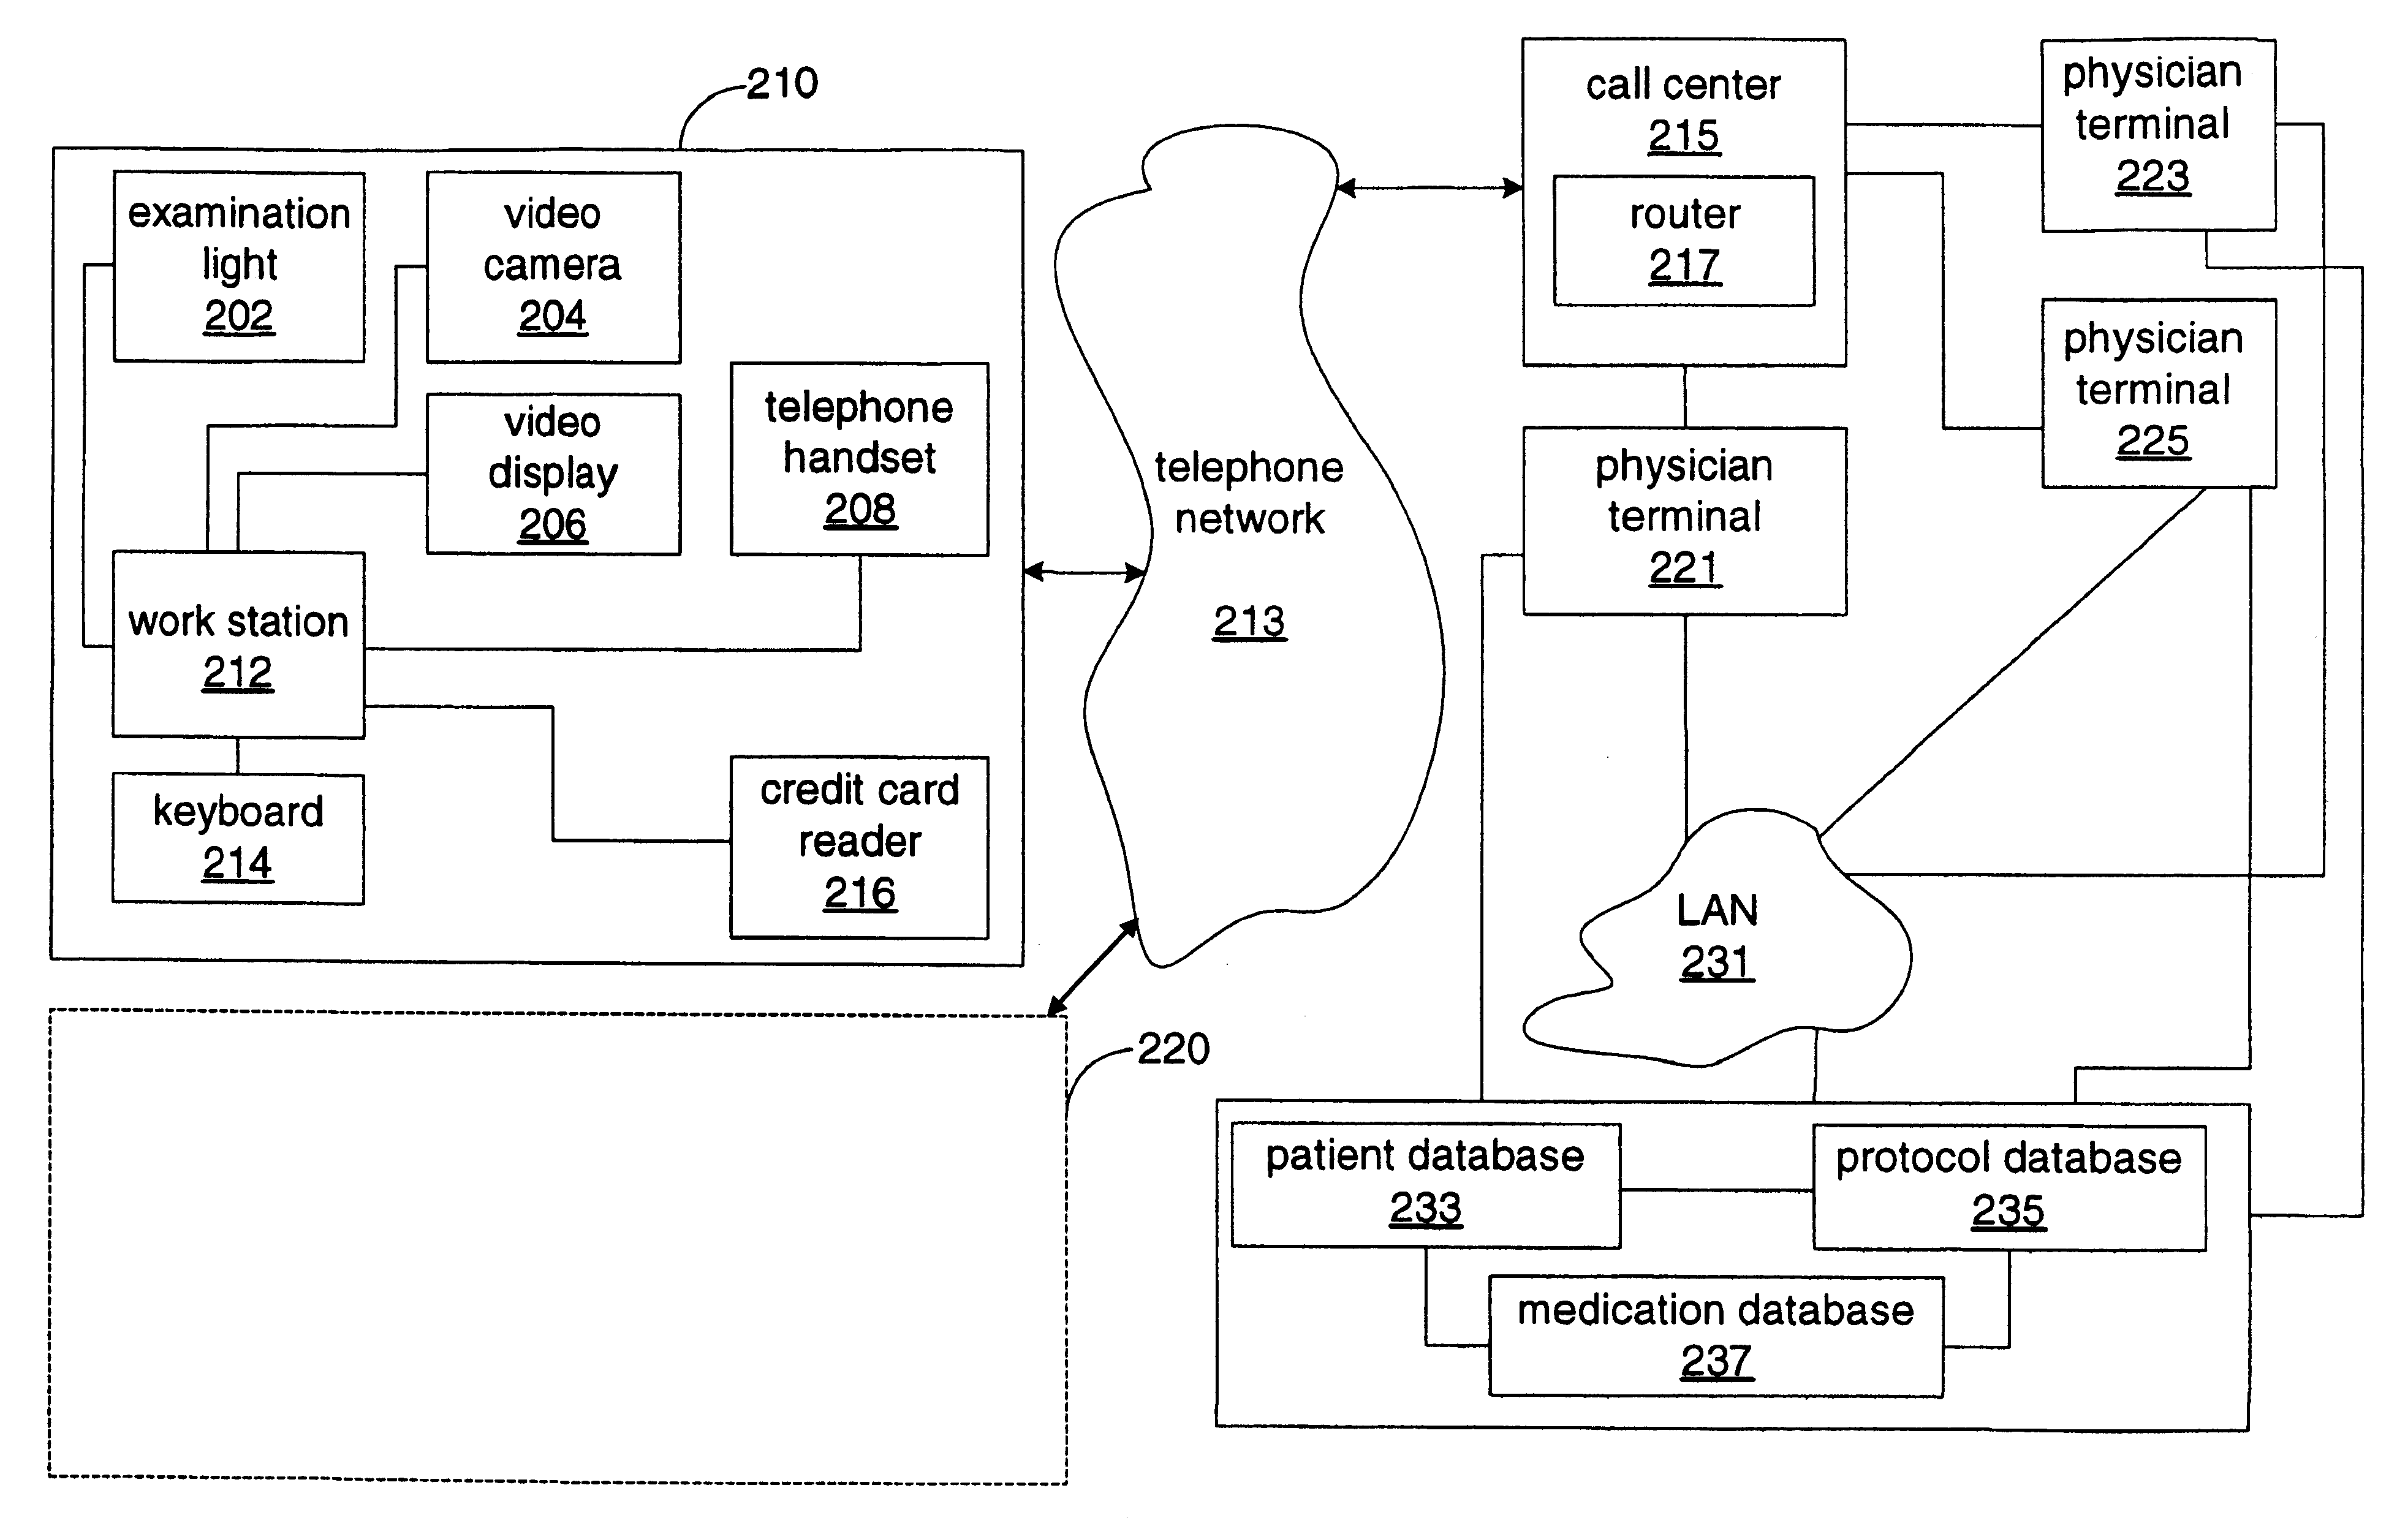 System and method for delivering medical examination, diagnosis, and treatment over a network